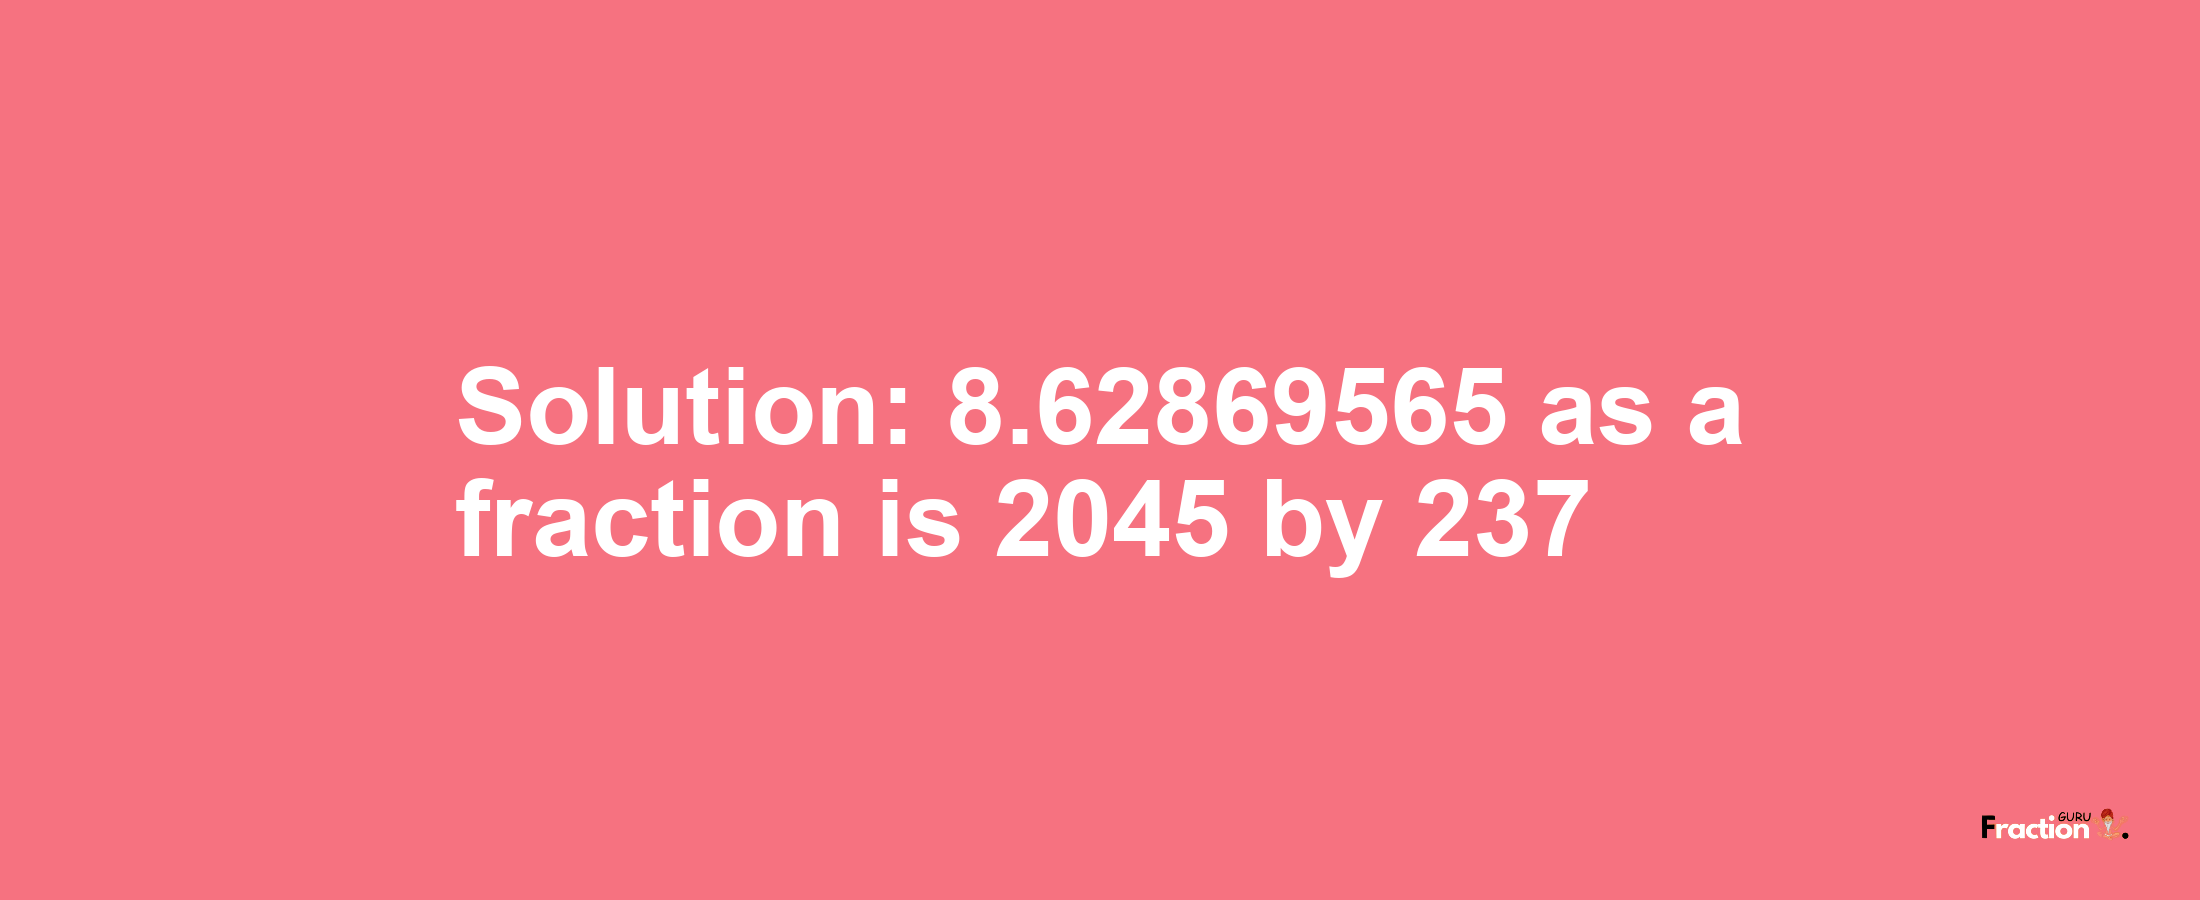 Solution:8.62869565 as a fraction is 2045/237